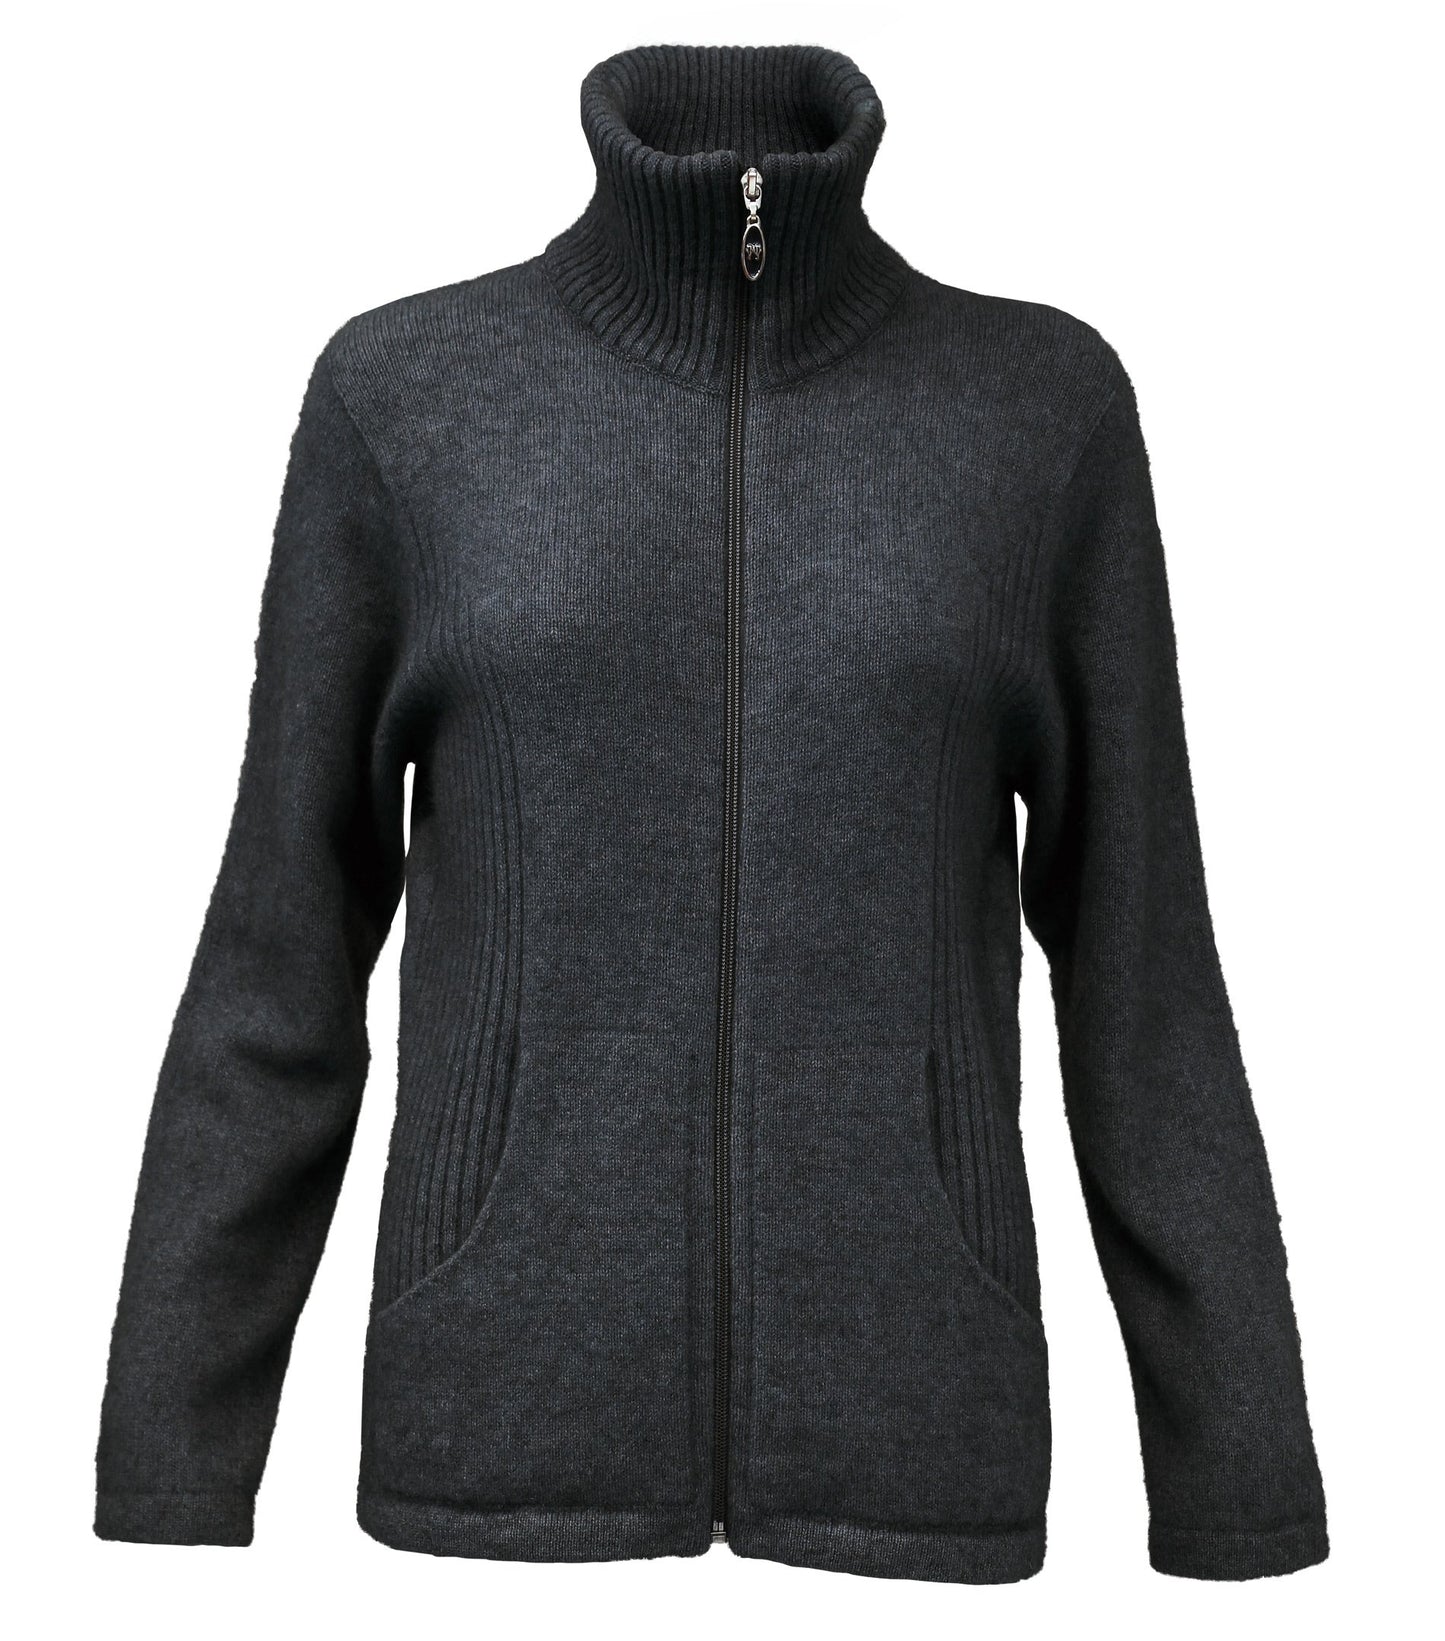 Market Day Jacket 8 / Charcoal Womens